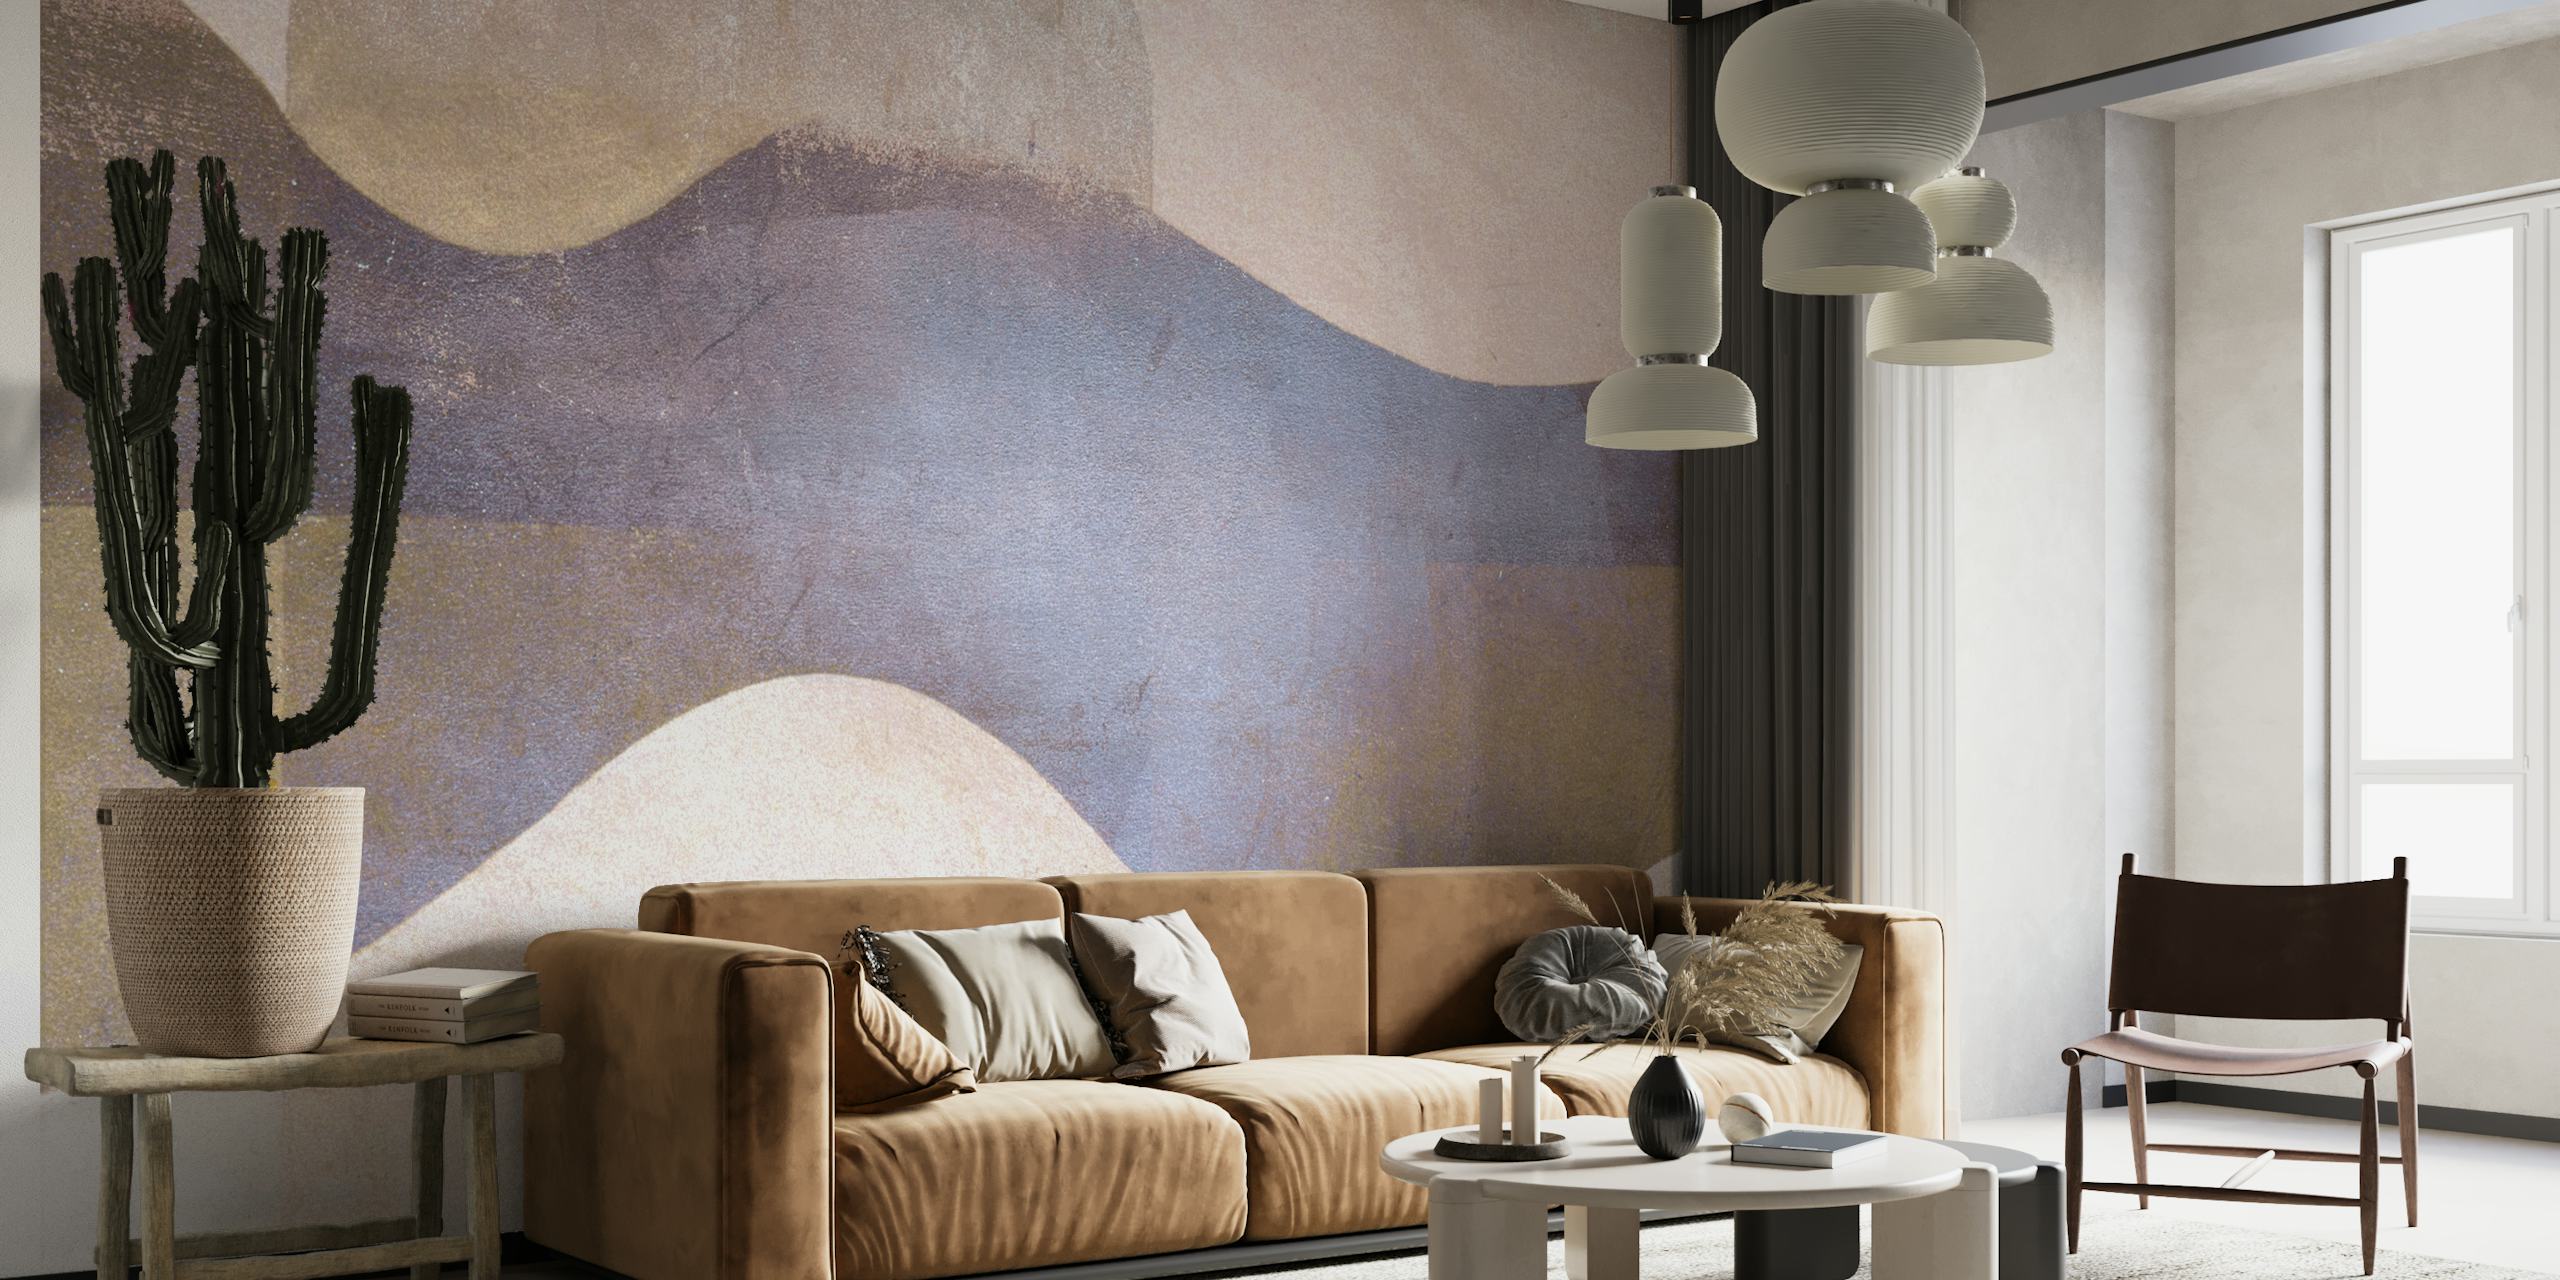 Abstract wavy wall mural in soft beige, mauve, and earth tones conveying a winter sun theme